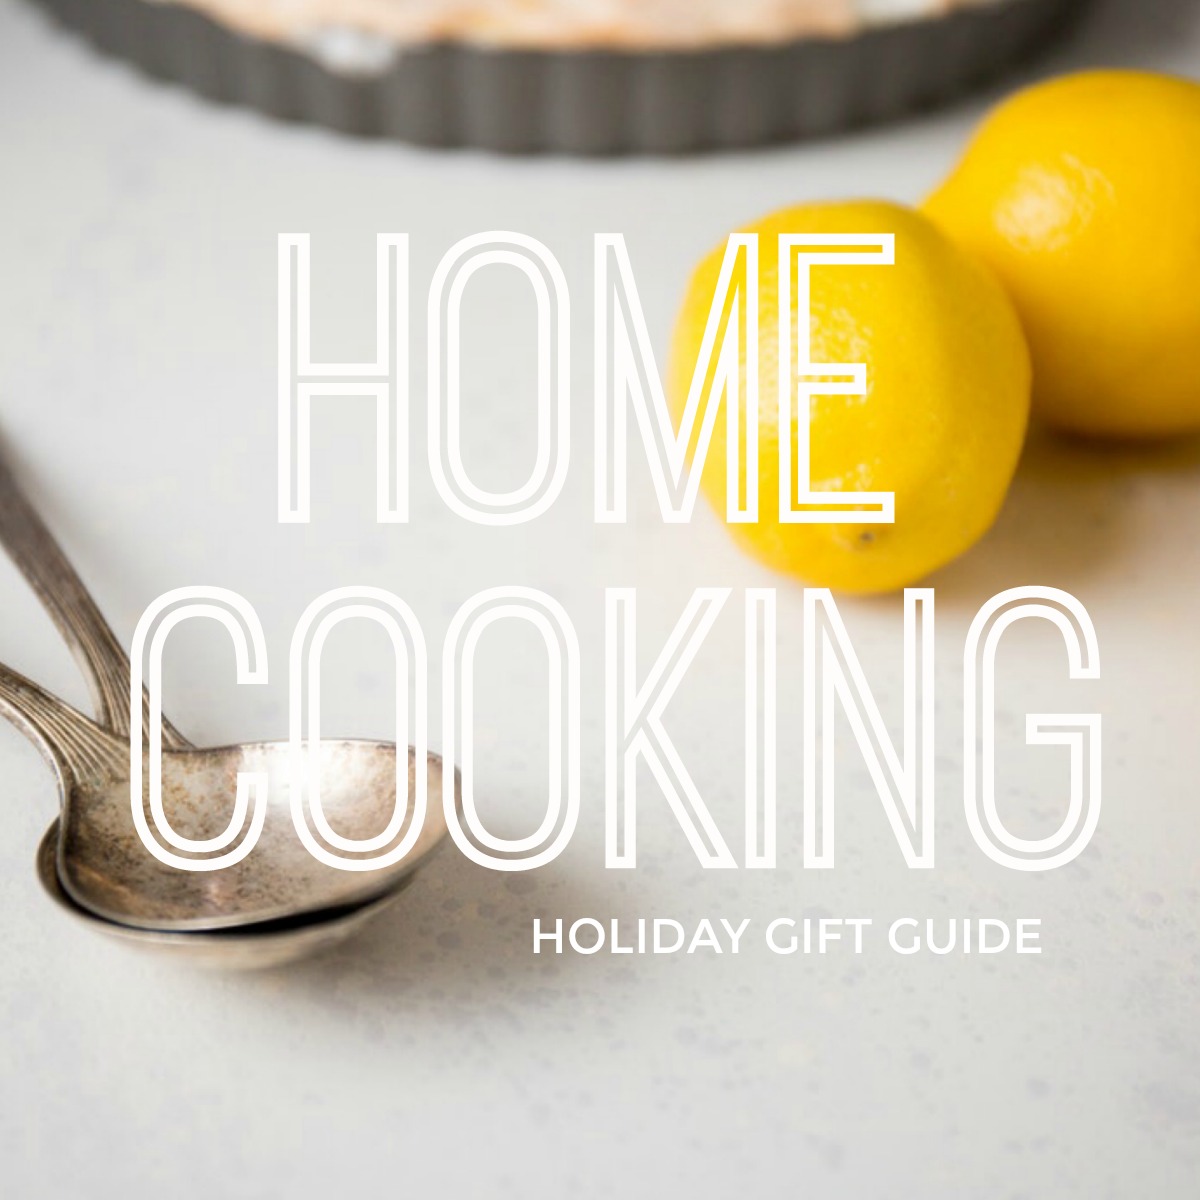 The Best Home Cooking Holiday Gift Guide